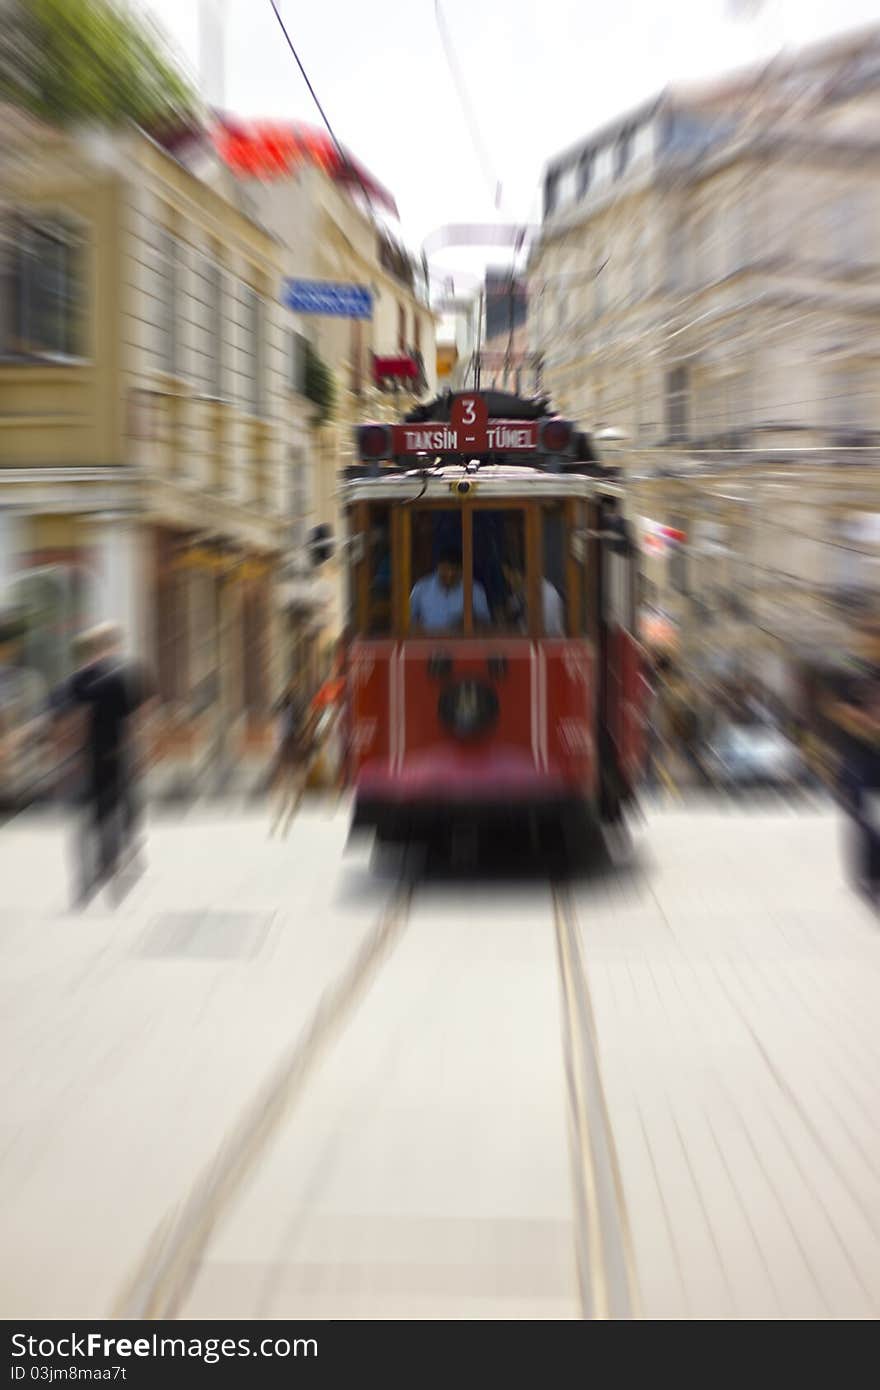 A tram in Istanbul en route to her destination. A tram in Istanbul en route to her destination